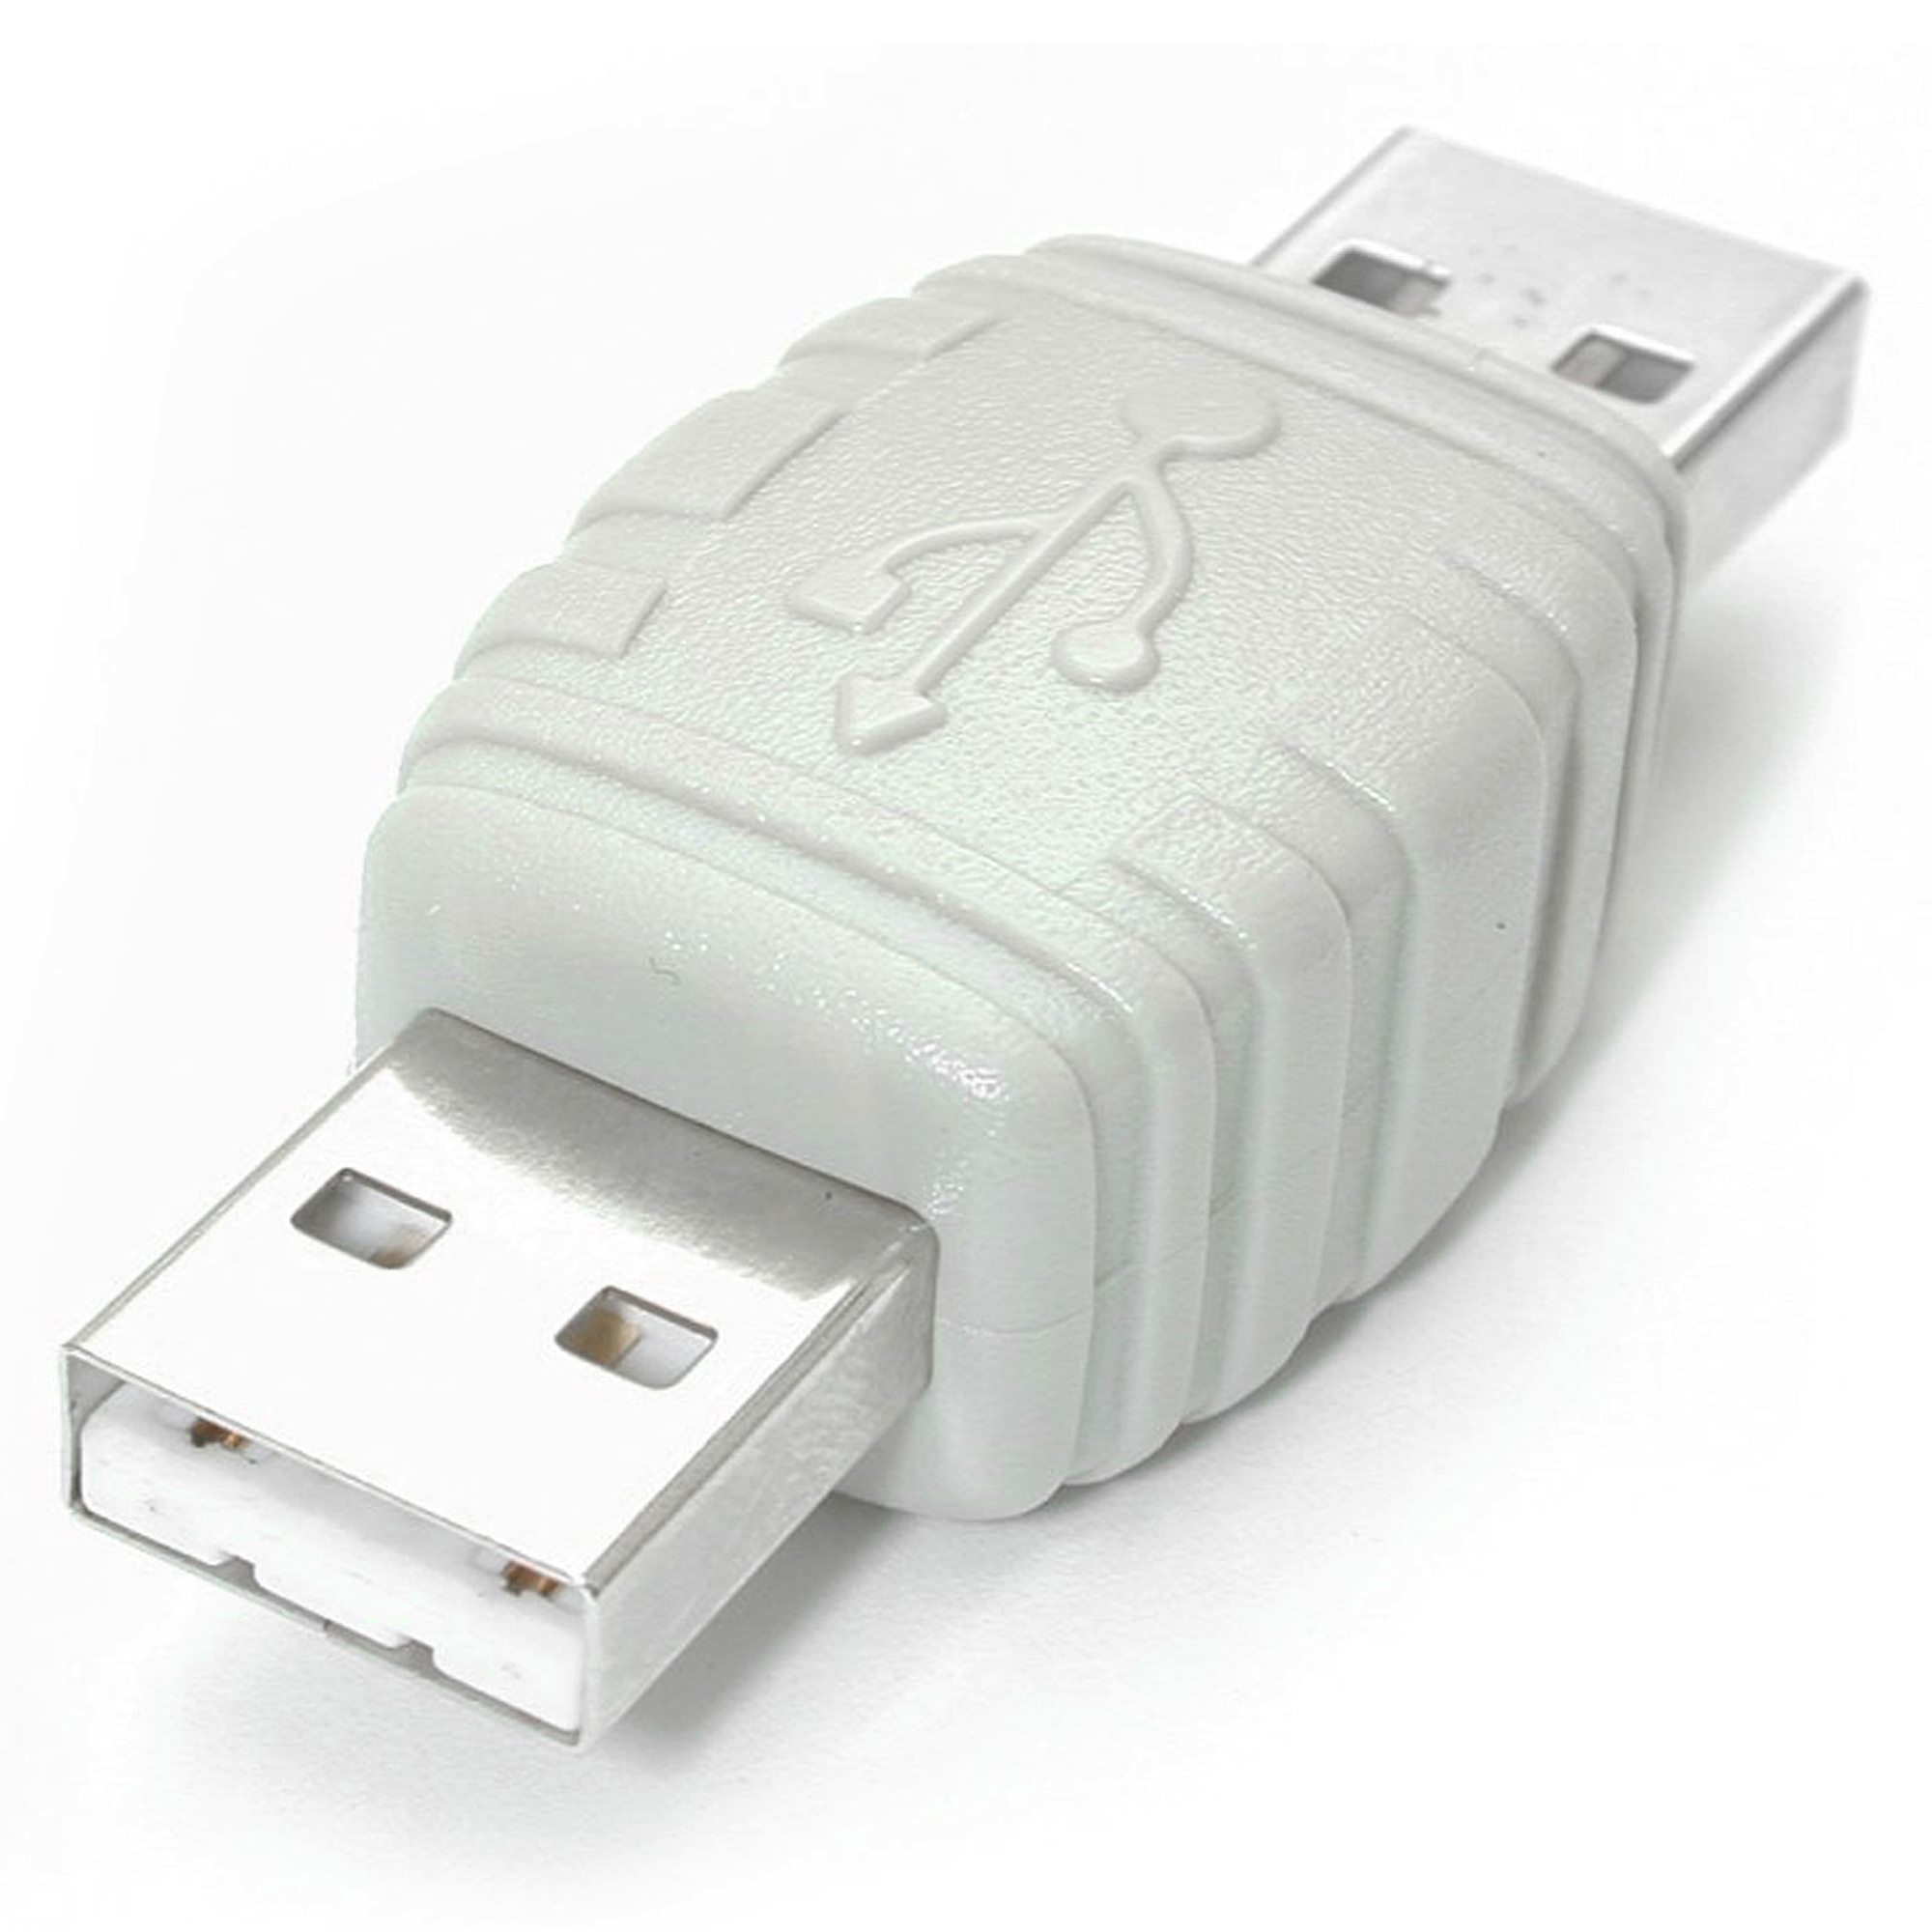 USB A to USB A Cable Adapter - Adapters (USB 2.0) StarTech.com